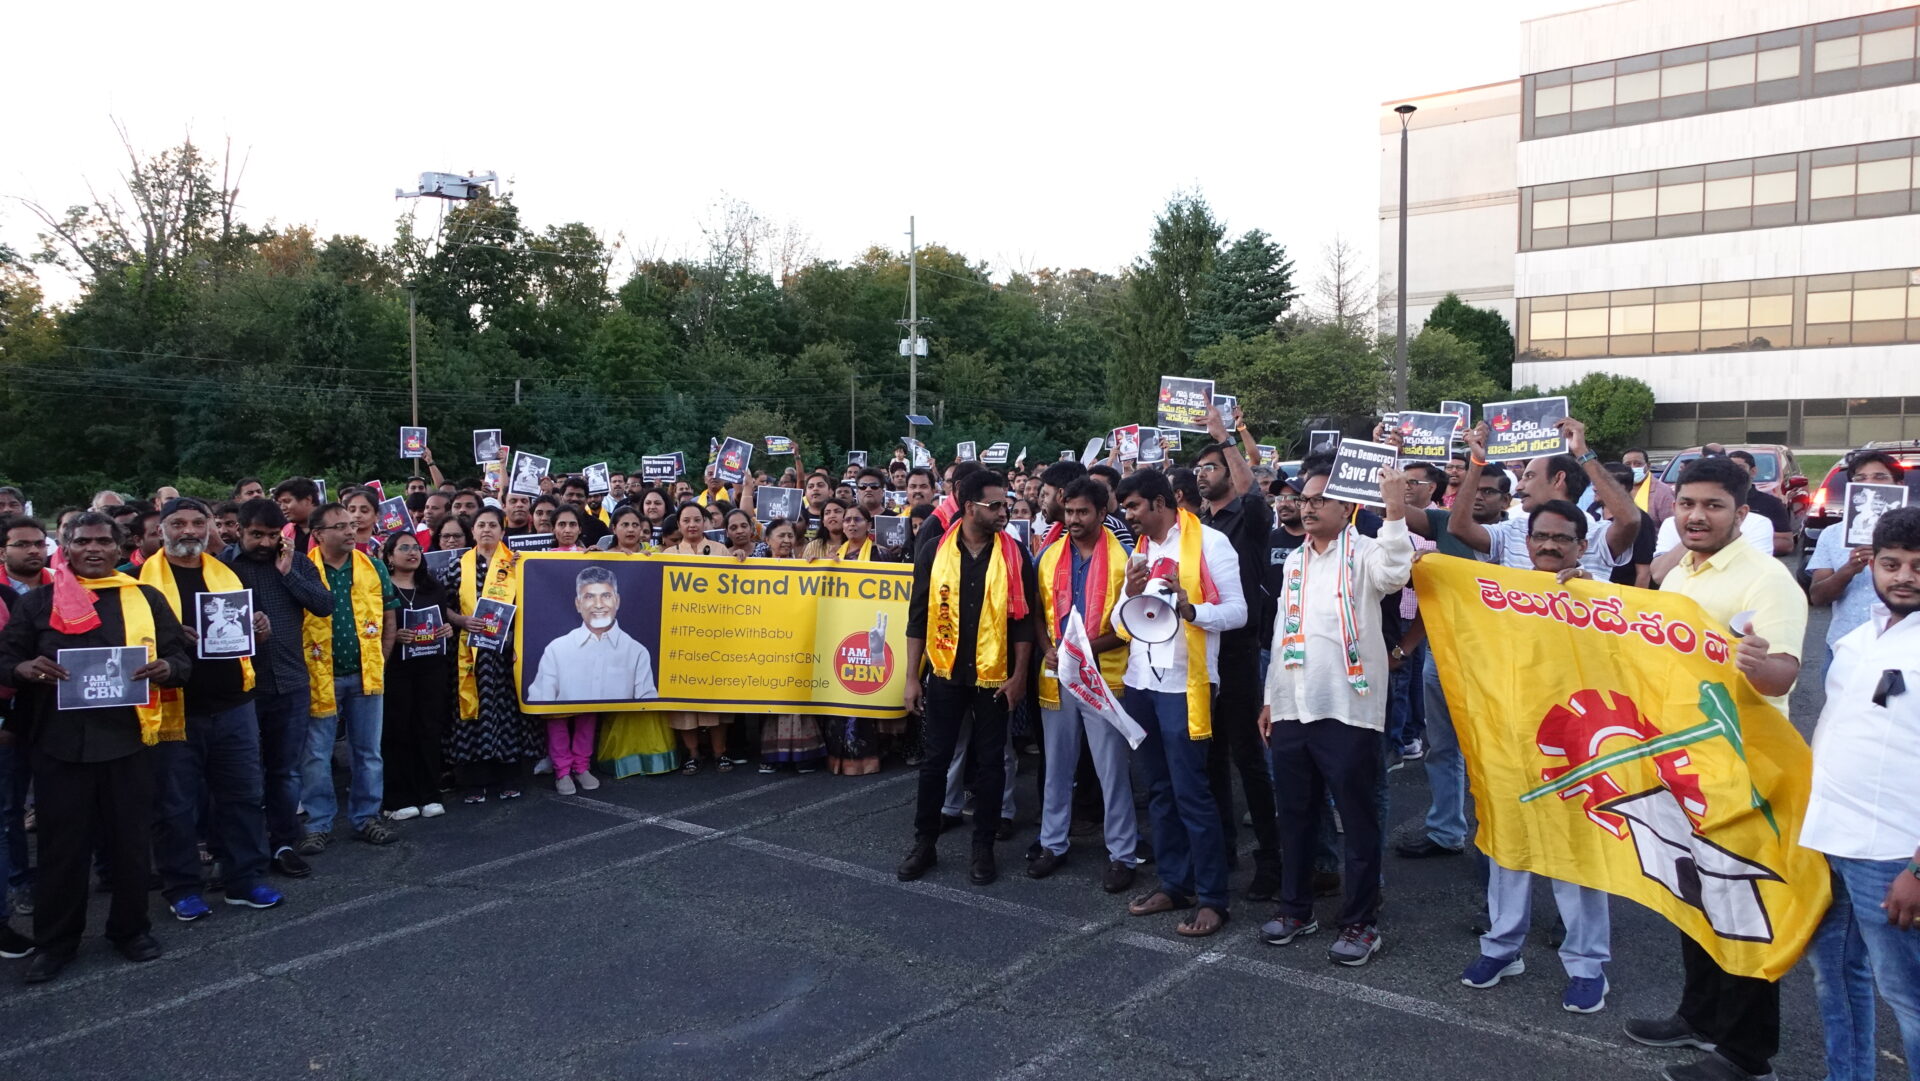 I am with CBN protests in New Jersey